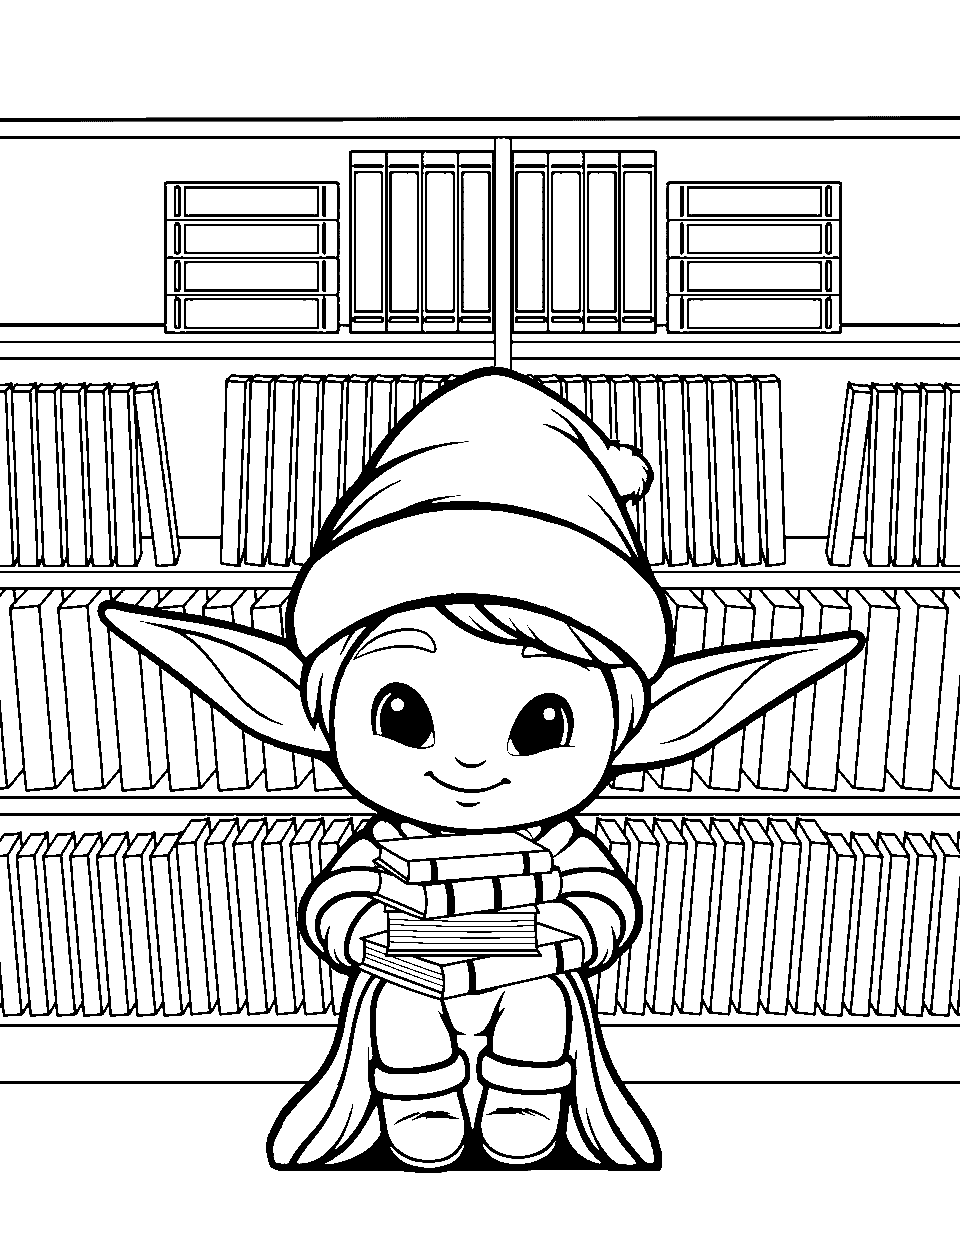 Elf Girl Reading in a Library Coloring Page - A cute elf girl with books in a cozy library setting.